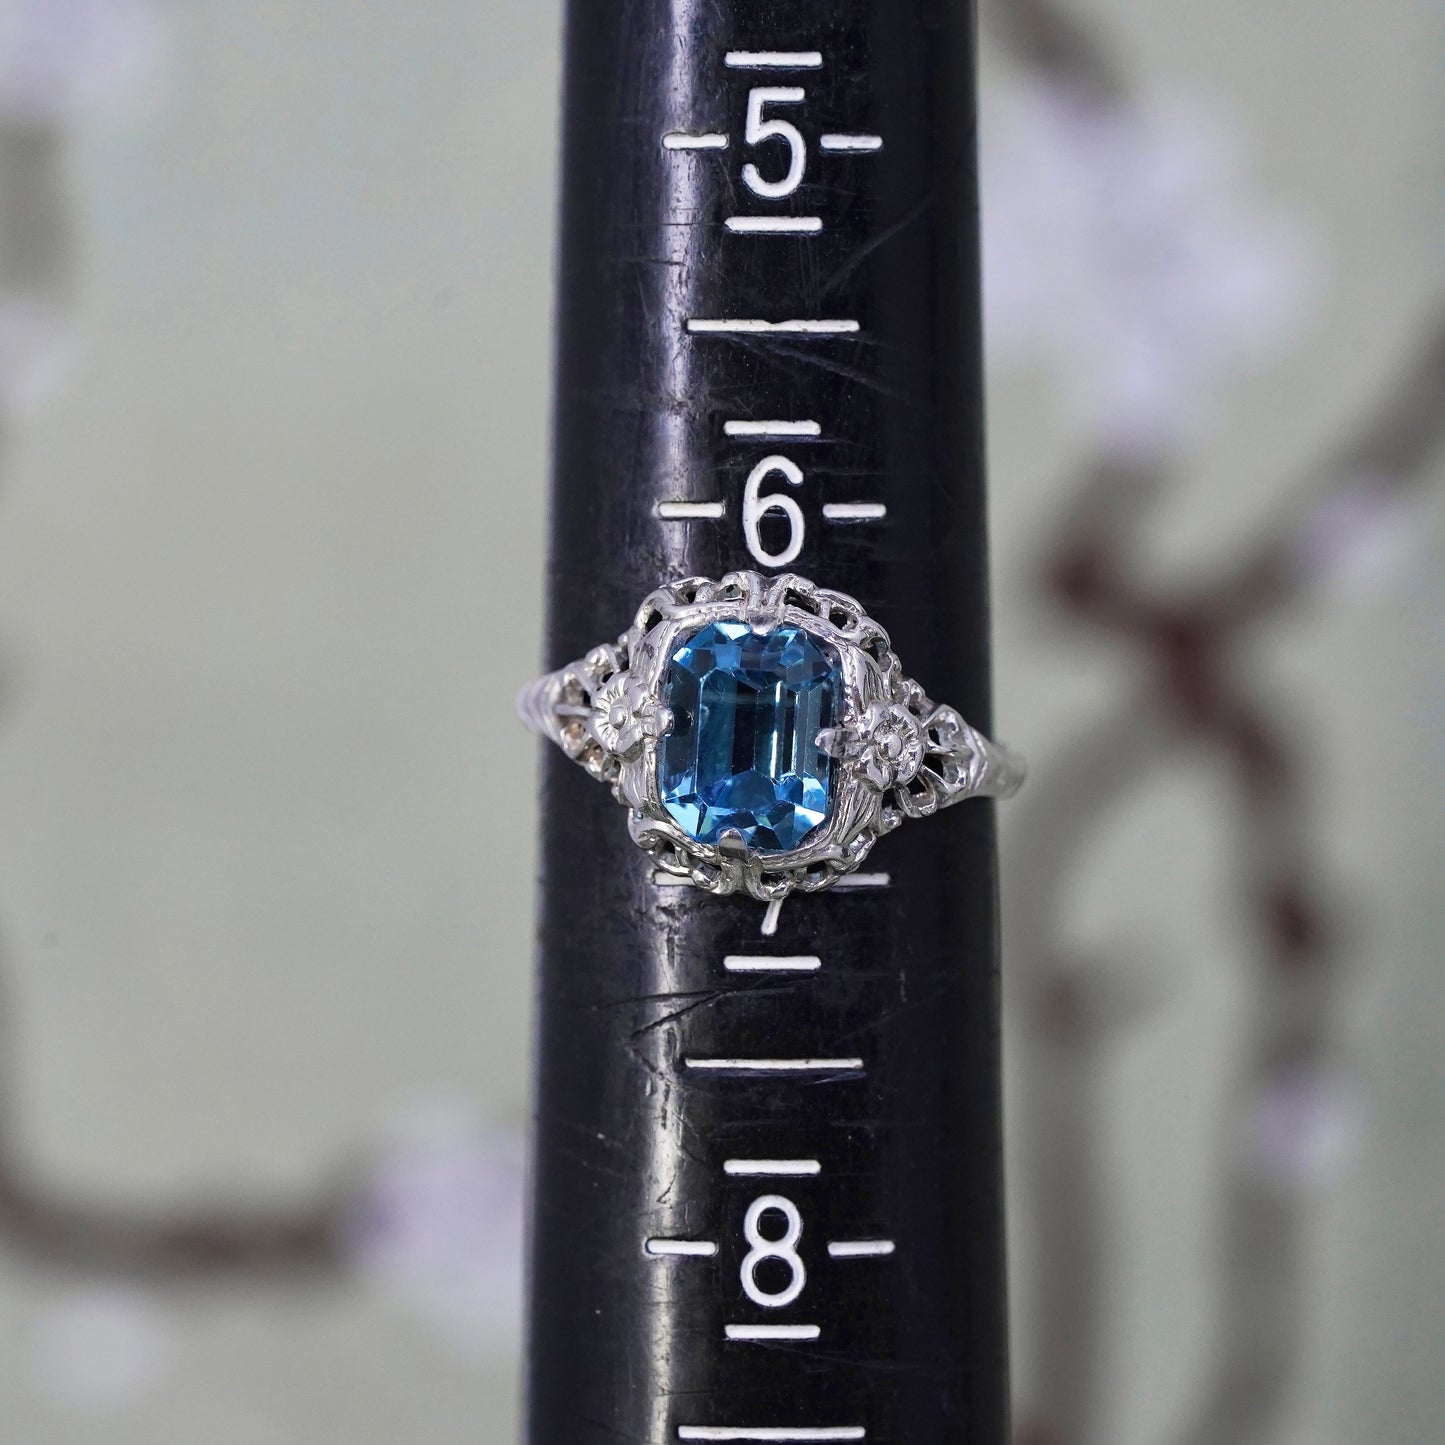 Size 6.5, 925 Sterling silver ring with blue Rhinestone, engagement ring